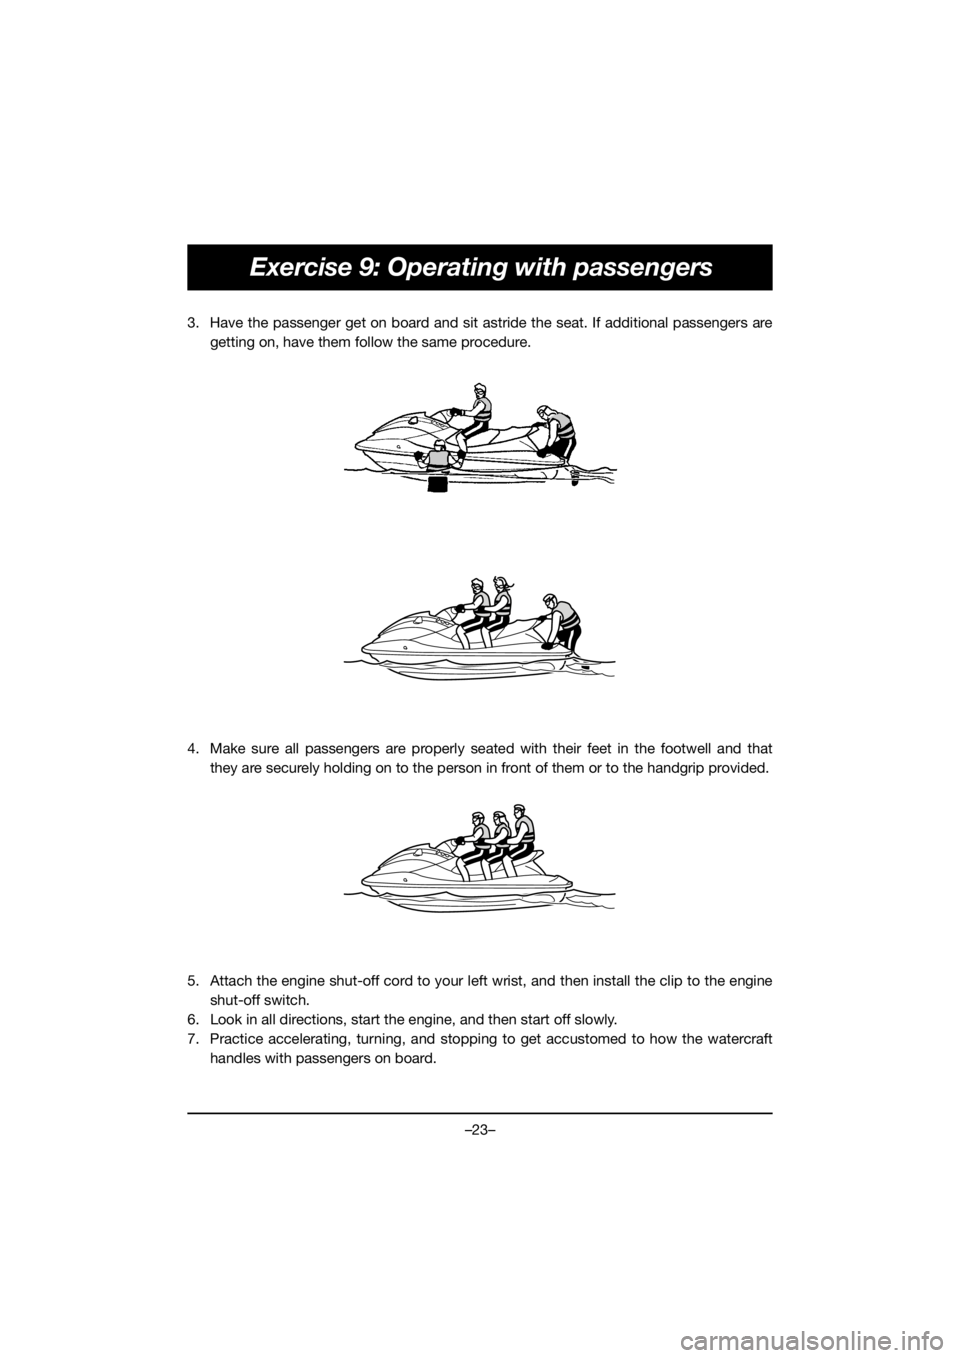 YAMAHA VX DELUXE 2019  Manual de utilização (in Portuguese) –23–
Exercise 9: Operating with passengers
3. Have the passenger get on board and sit astride the seat. If additional passengers are
getting on, have them follow the same procedure. 
4. Make sure 